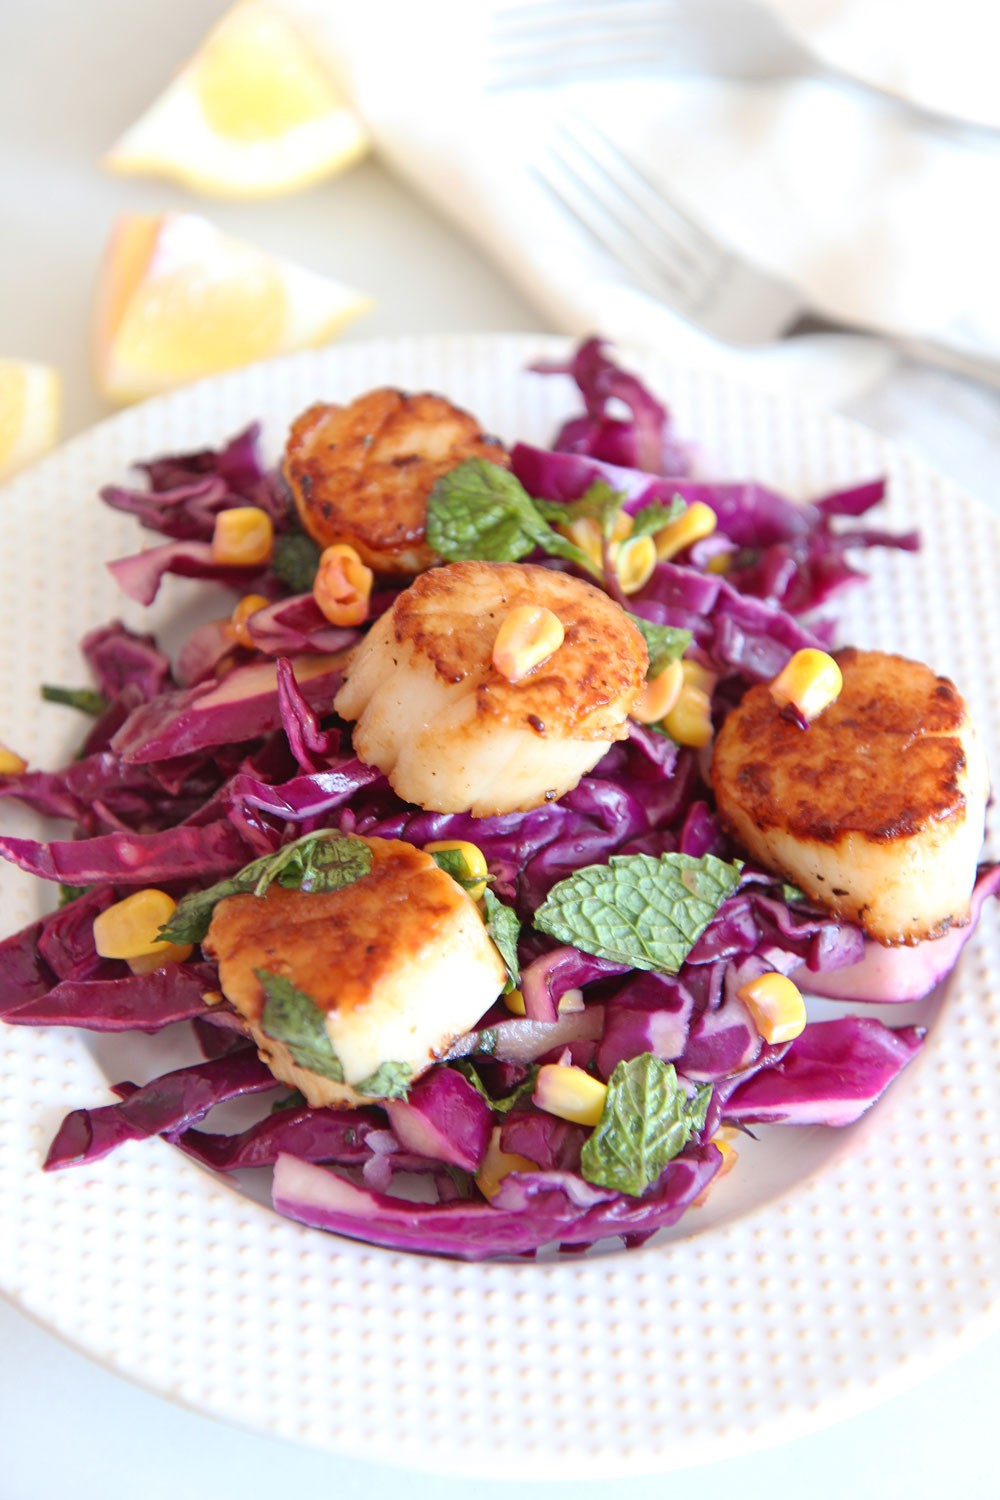 Scallops and Quick Cabbage Slaw Recipe. Grab scallops, red cabbage, shallots, apple cider vinegar, salt, pepper, mint, and enjoy! Easy summer recipe for busy weeknights! #scalloprecipe #slawrecipe